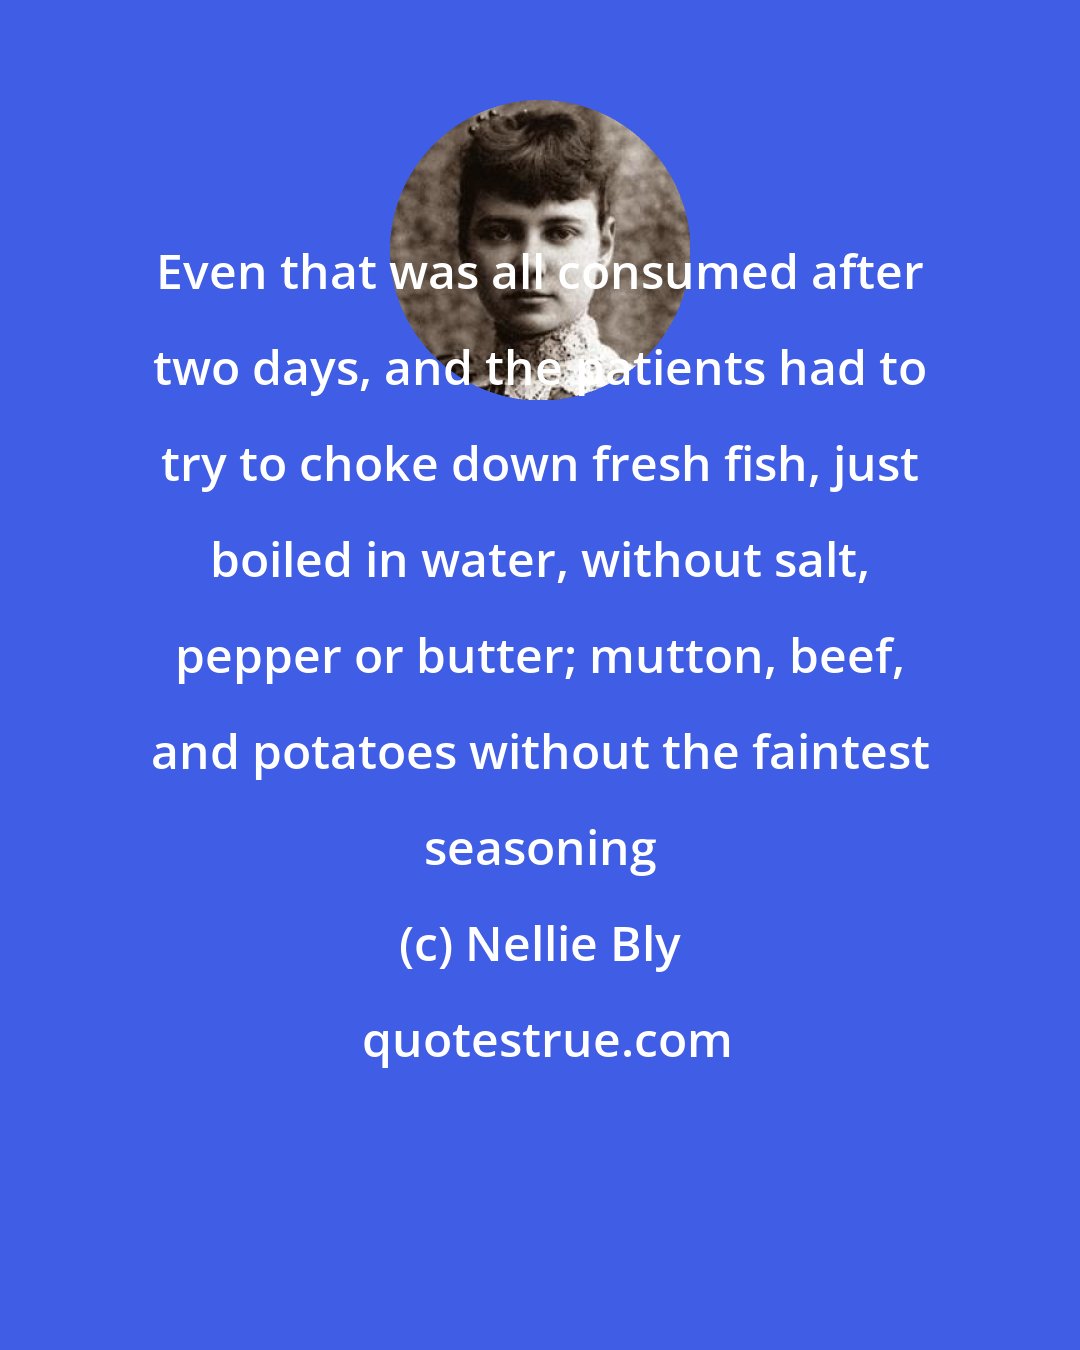 Nellie Bly: Even that was all consumed after two days, and the patients had to try to choke down fresh fish, just boiled in water, without salt, pepper or butter; mutton, beef, and potatoes without the faintest seasoning